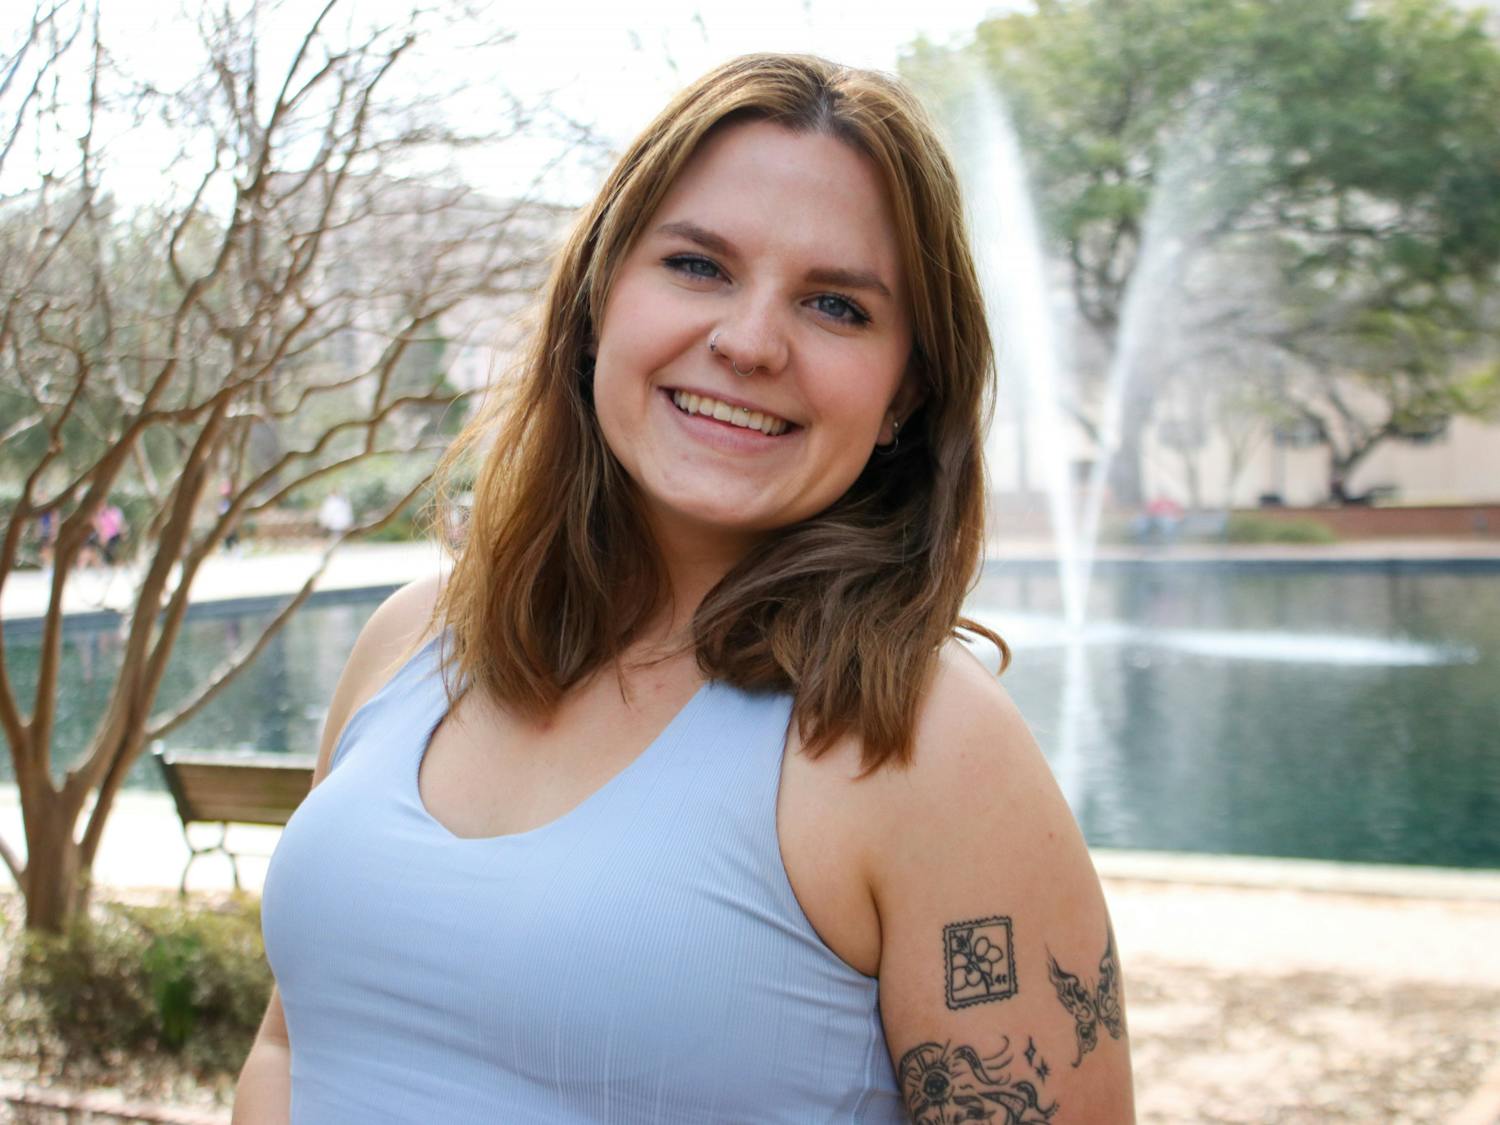 Syd Sandford started getting tattoos as early as 17 years old, and instead of shying away from tattoo regrets, she embraces the tattoos she has since grown out of. “For me, I have tattoos that I wouldn’t get again and I don’t love most days,” Sandford said. “But it’s a tribute to (the) 18-year-old me who looked at it and was like, ‘Yes, I want that on my body forever.’” Though she has grown out of some tattoos, others have stood the test of time. The stamp tattoo, seen next to the butterfly, is part of a matching set that ties Sandford to her long-distance best friend of nine years. Sandford’s stamp has the Nova Scotia flower — Canada’s national flower — and her friend’s stamp has the South Carolina flower. The 14 cent price indicates 2014 — the year they met. “We got a little piece of each other,” Sandford said.